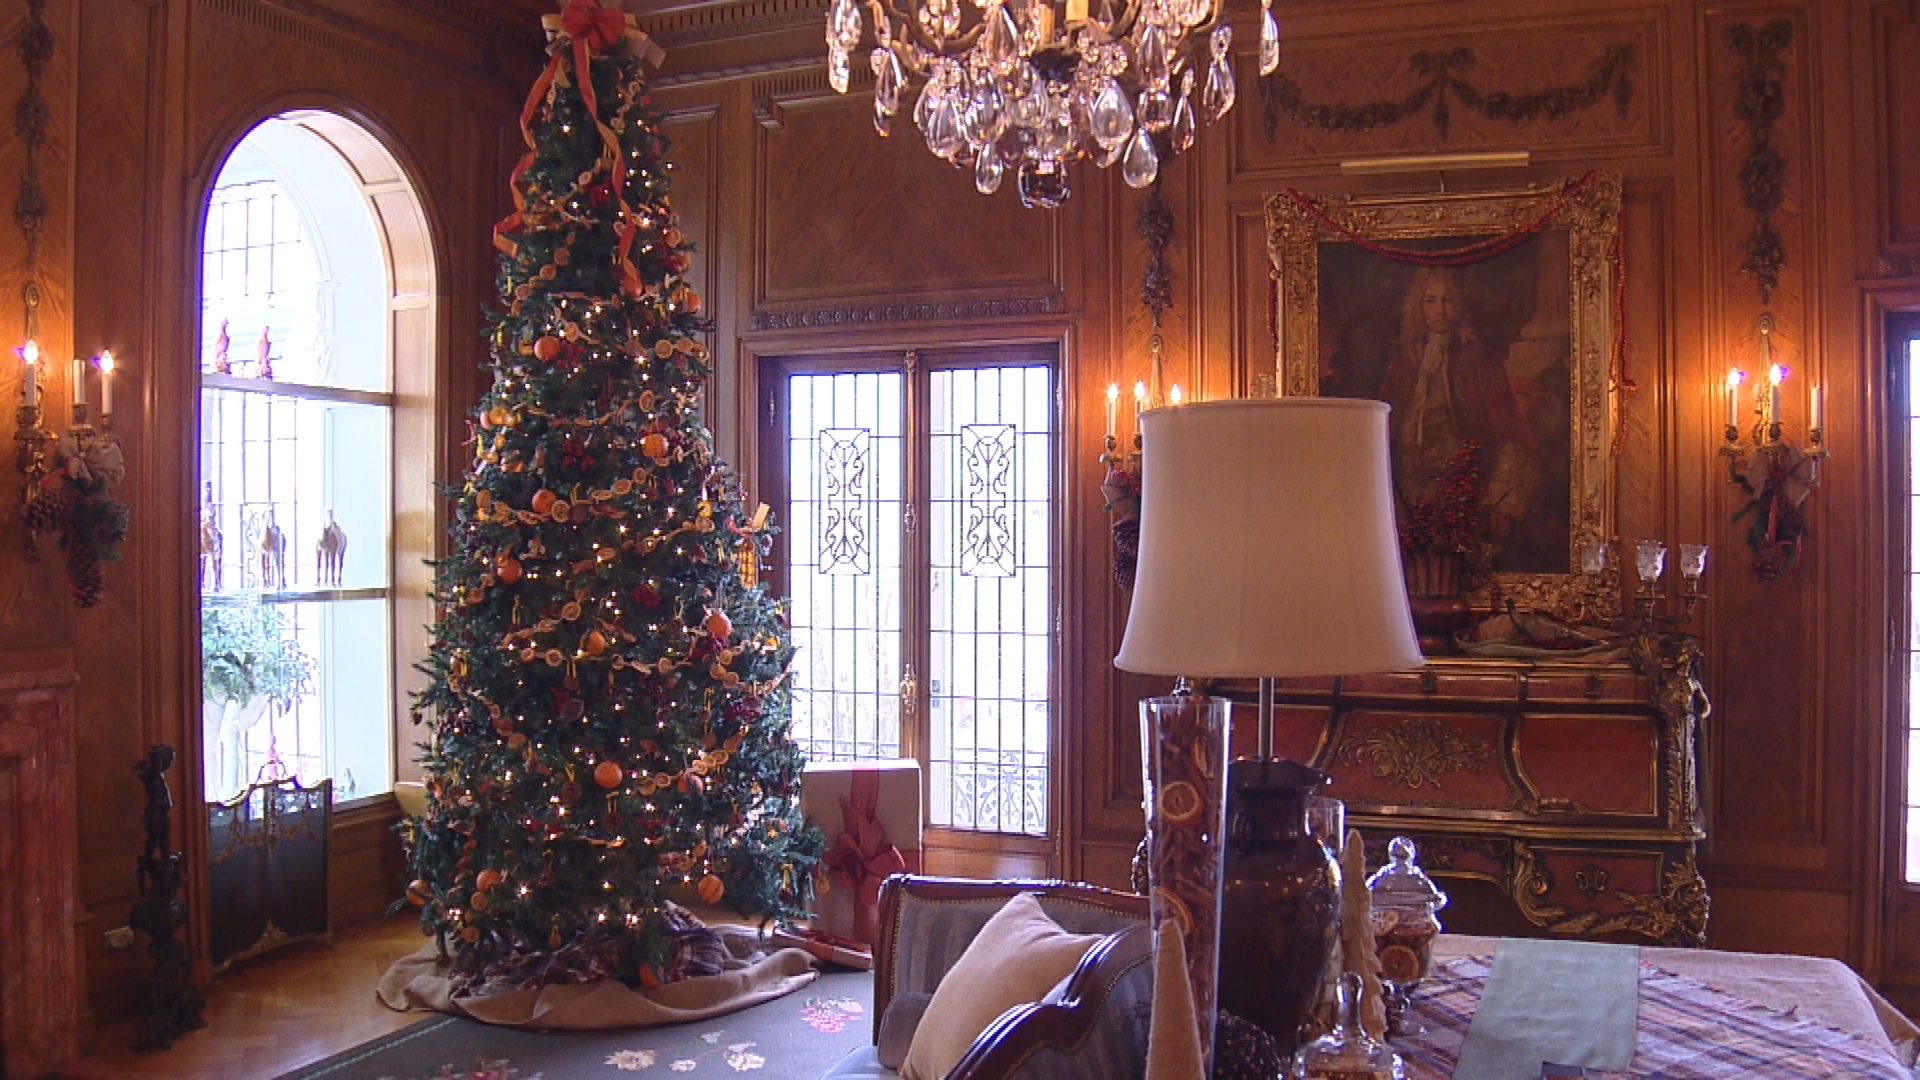 CO Governor’s Residence Gets Dressed For The Holidays